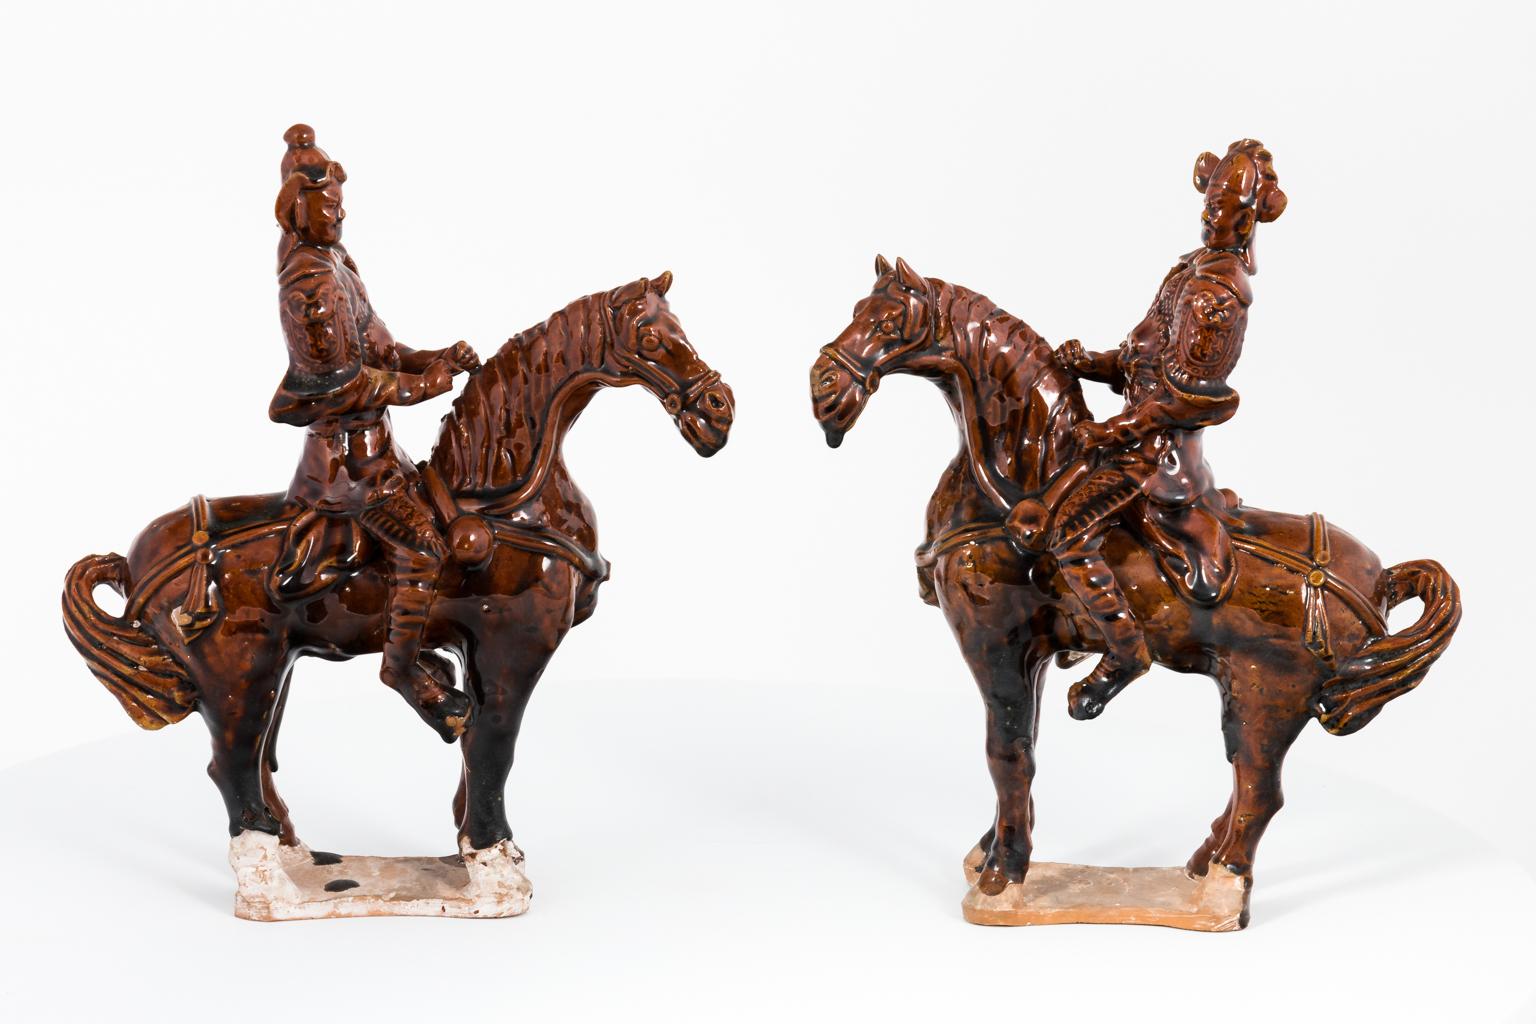 Pair of Tang style mantle figurines depicting two warriors riding horses, circa 1930s. The figurines measure 9.00 inches height by 8.00 inches wide.